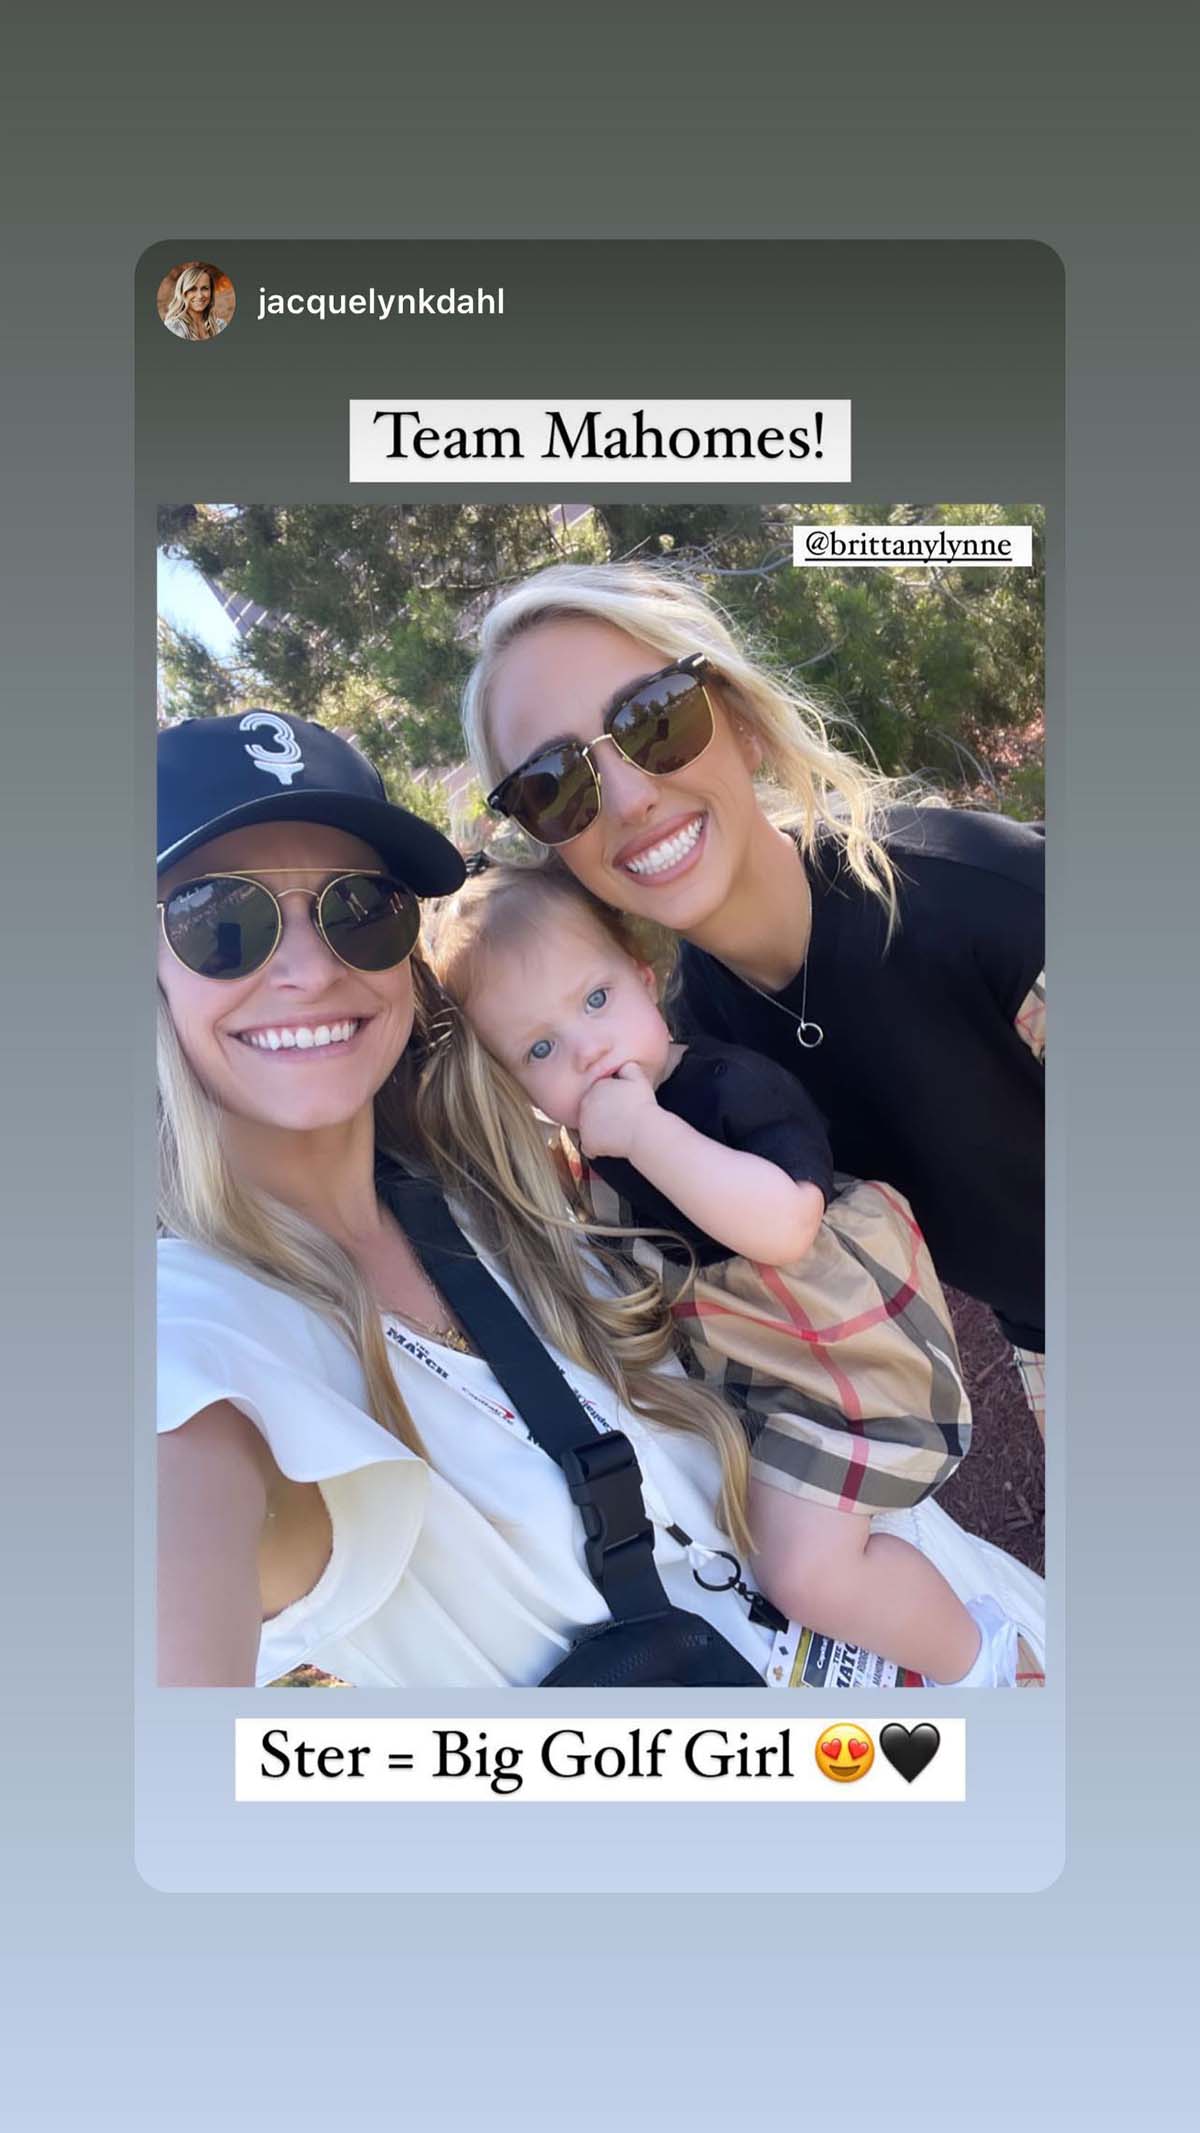 Patrick Mahomes and fiancée Brittany Matthews take daughter